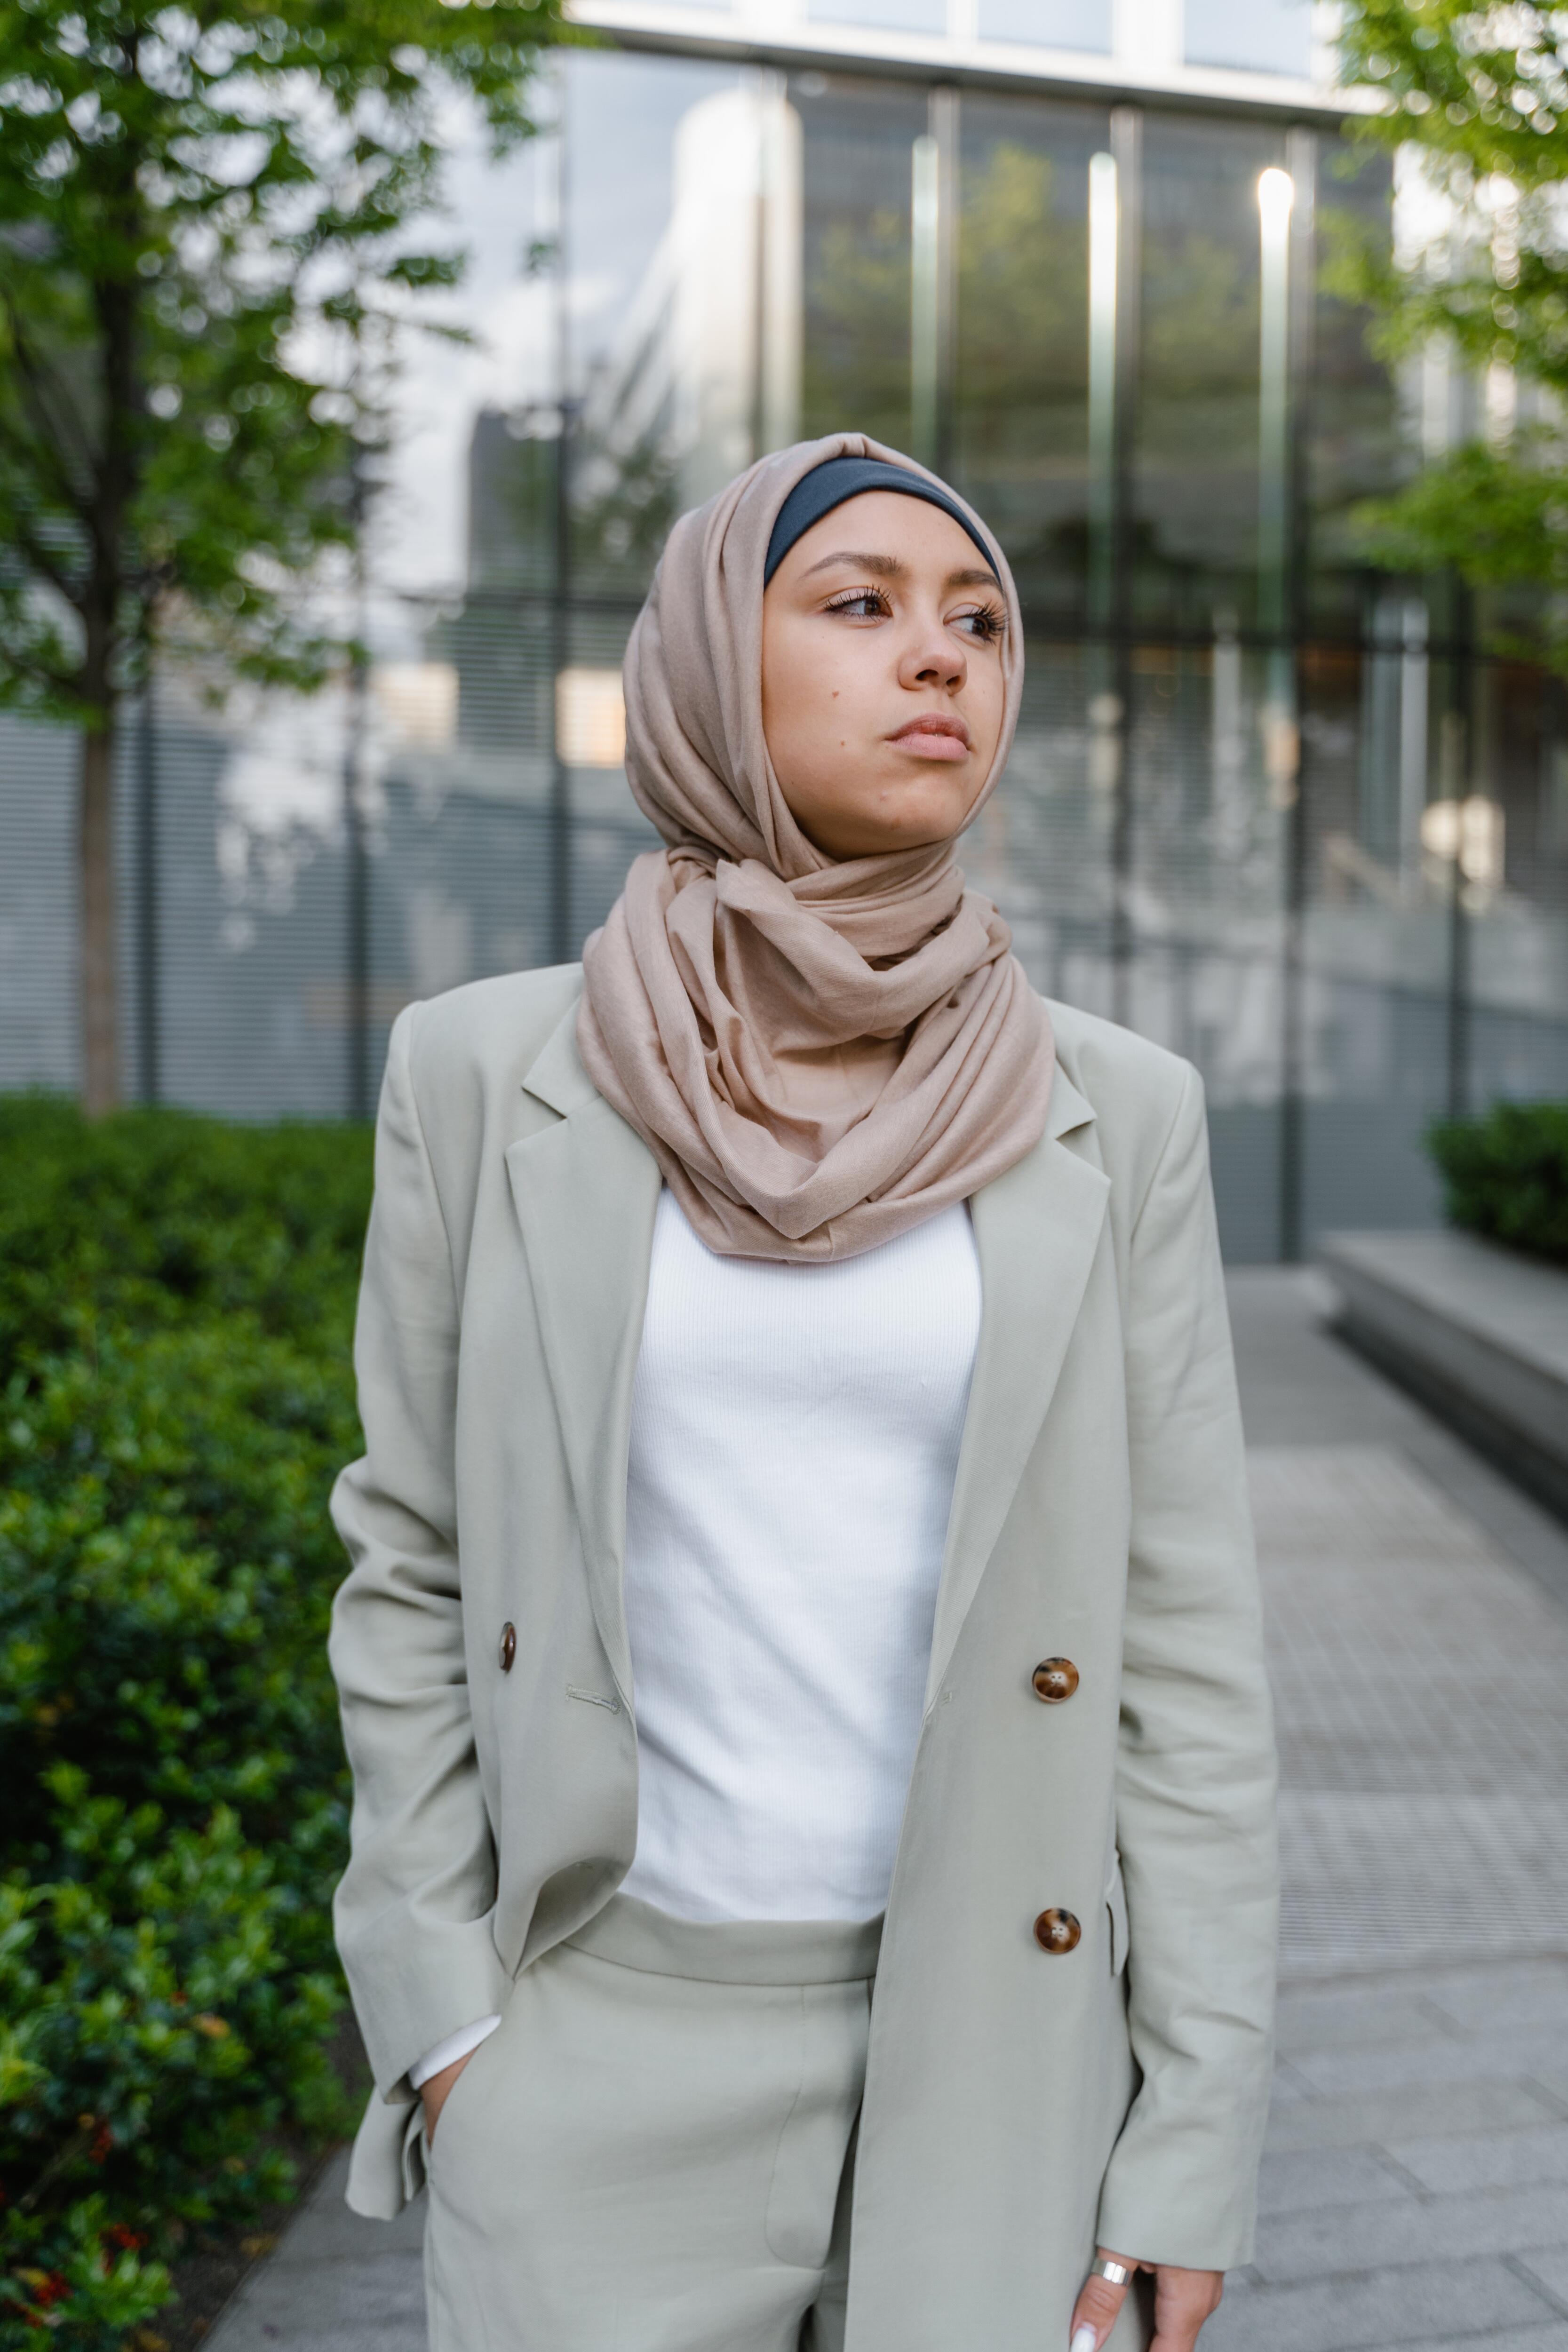 woman in a hijab and taupe-colored suite with white blouse standing outside